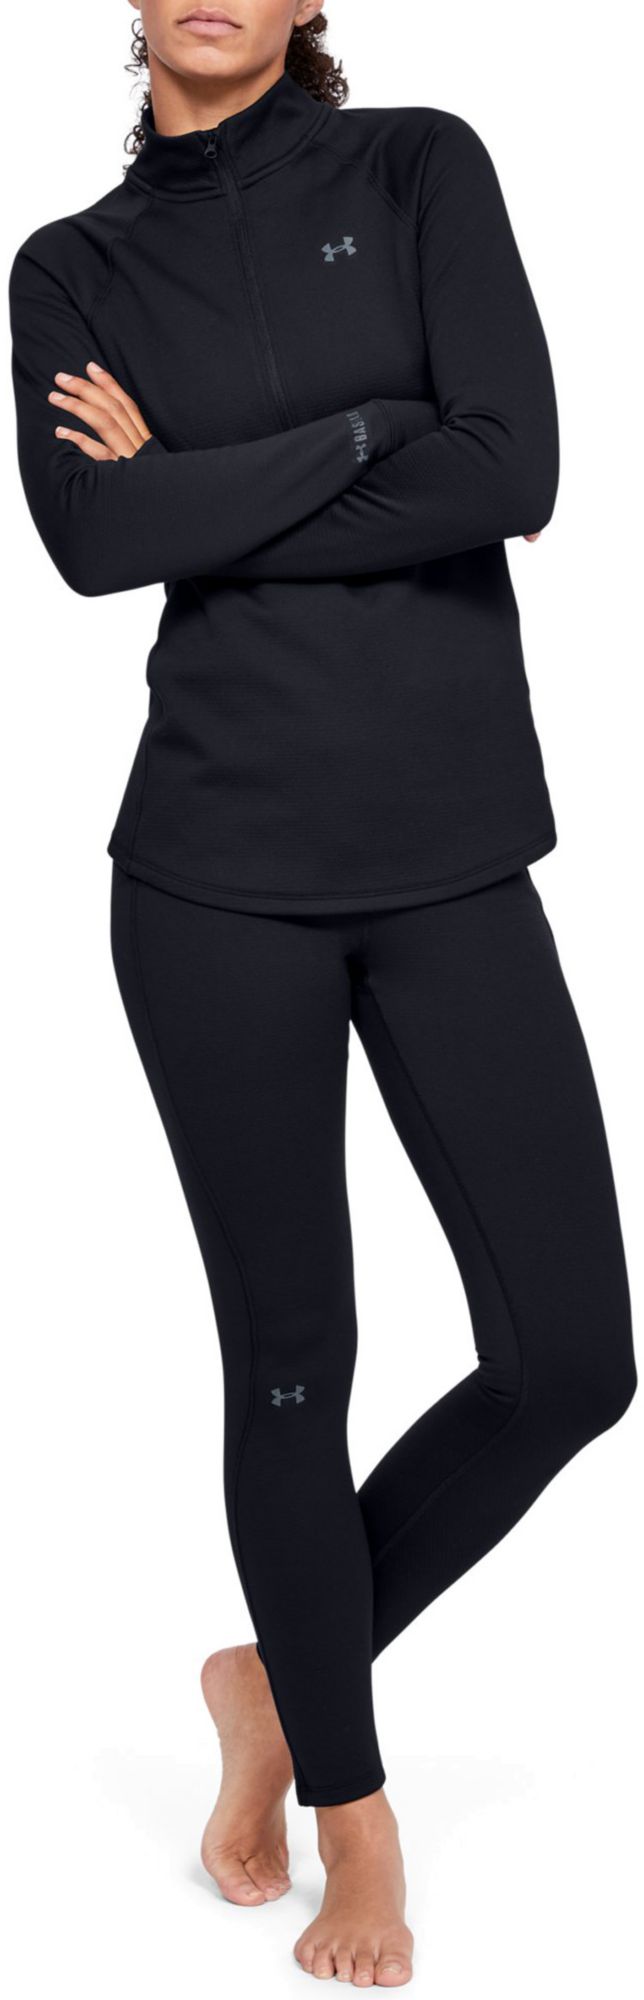 womens base layer under armour